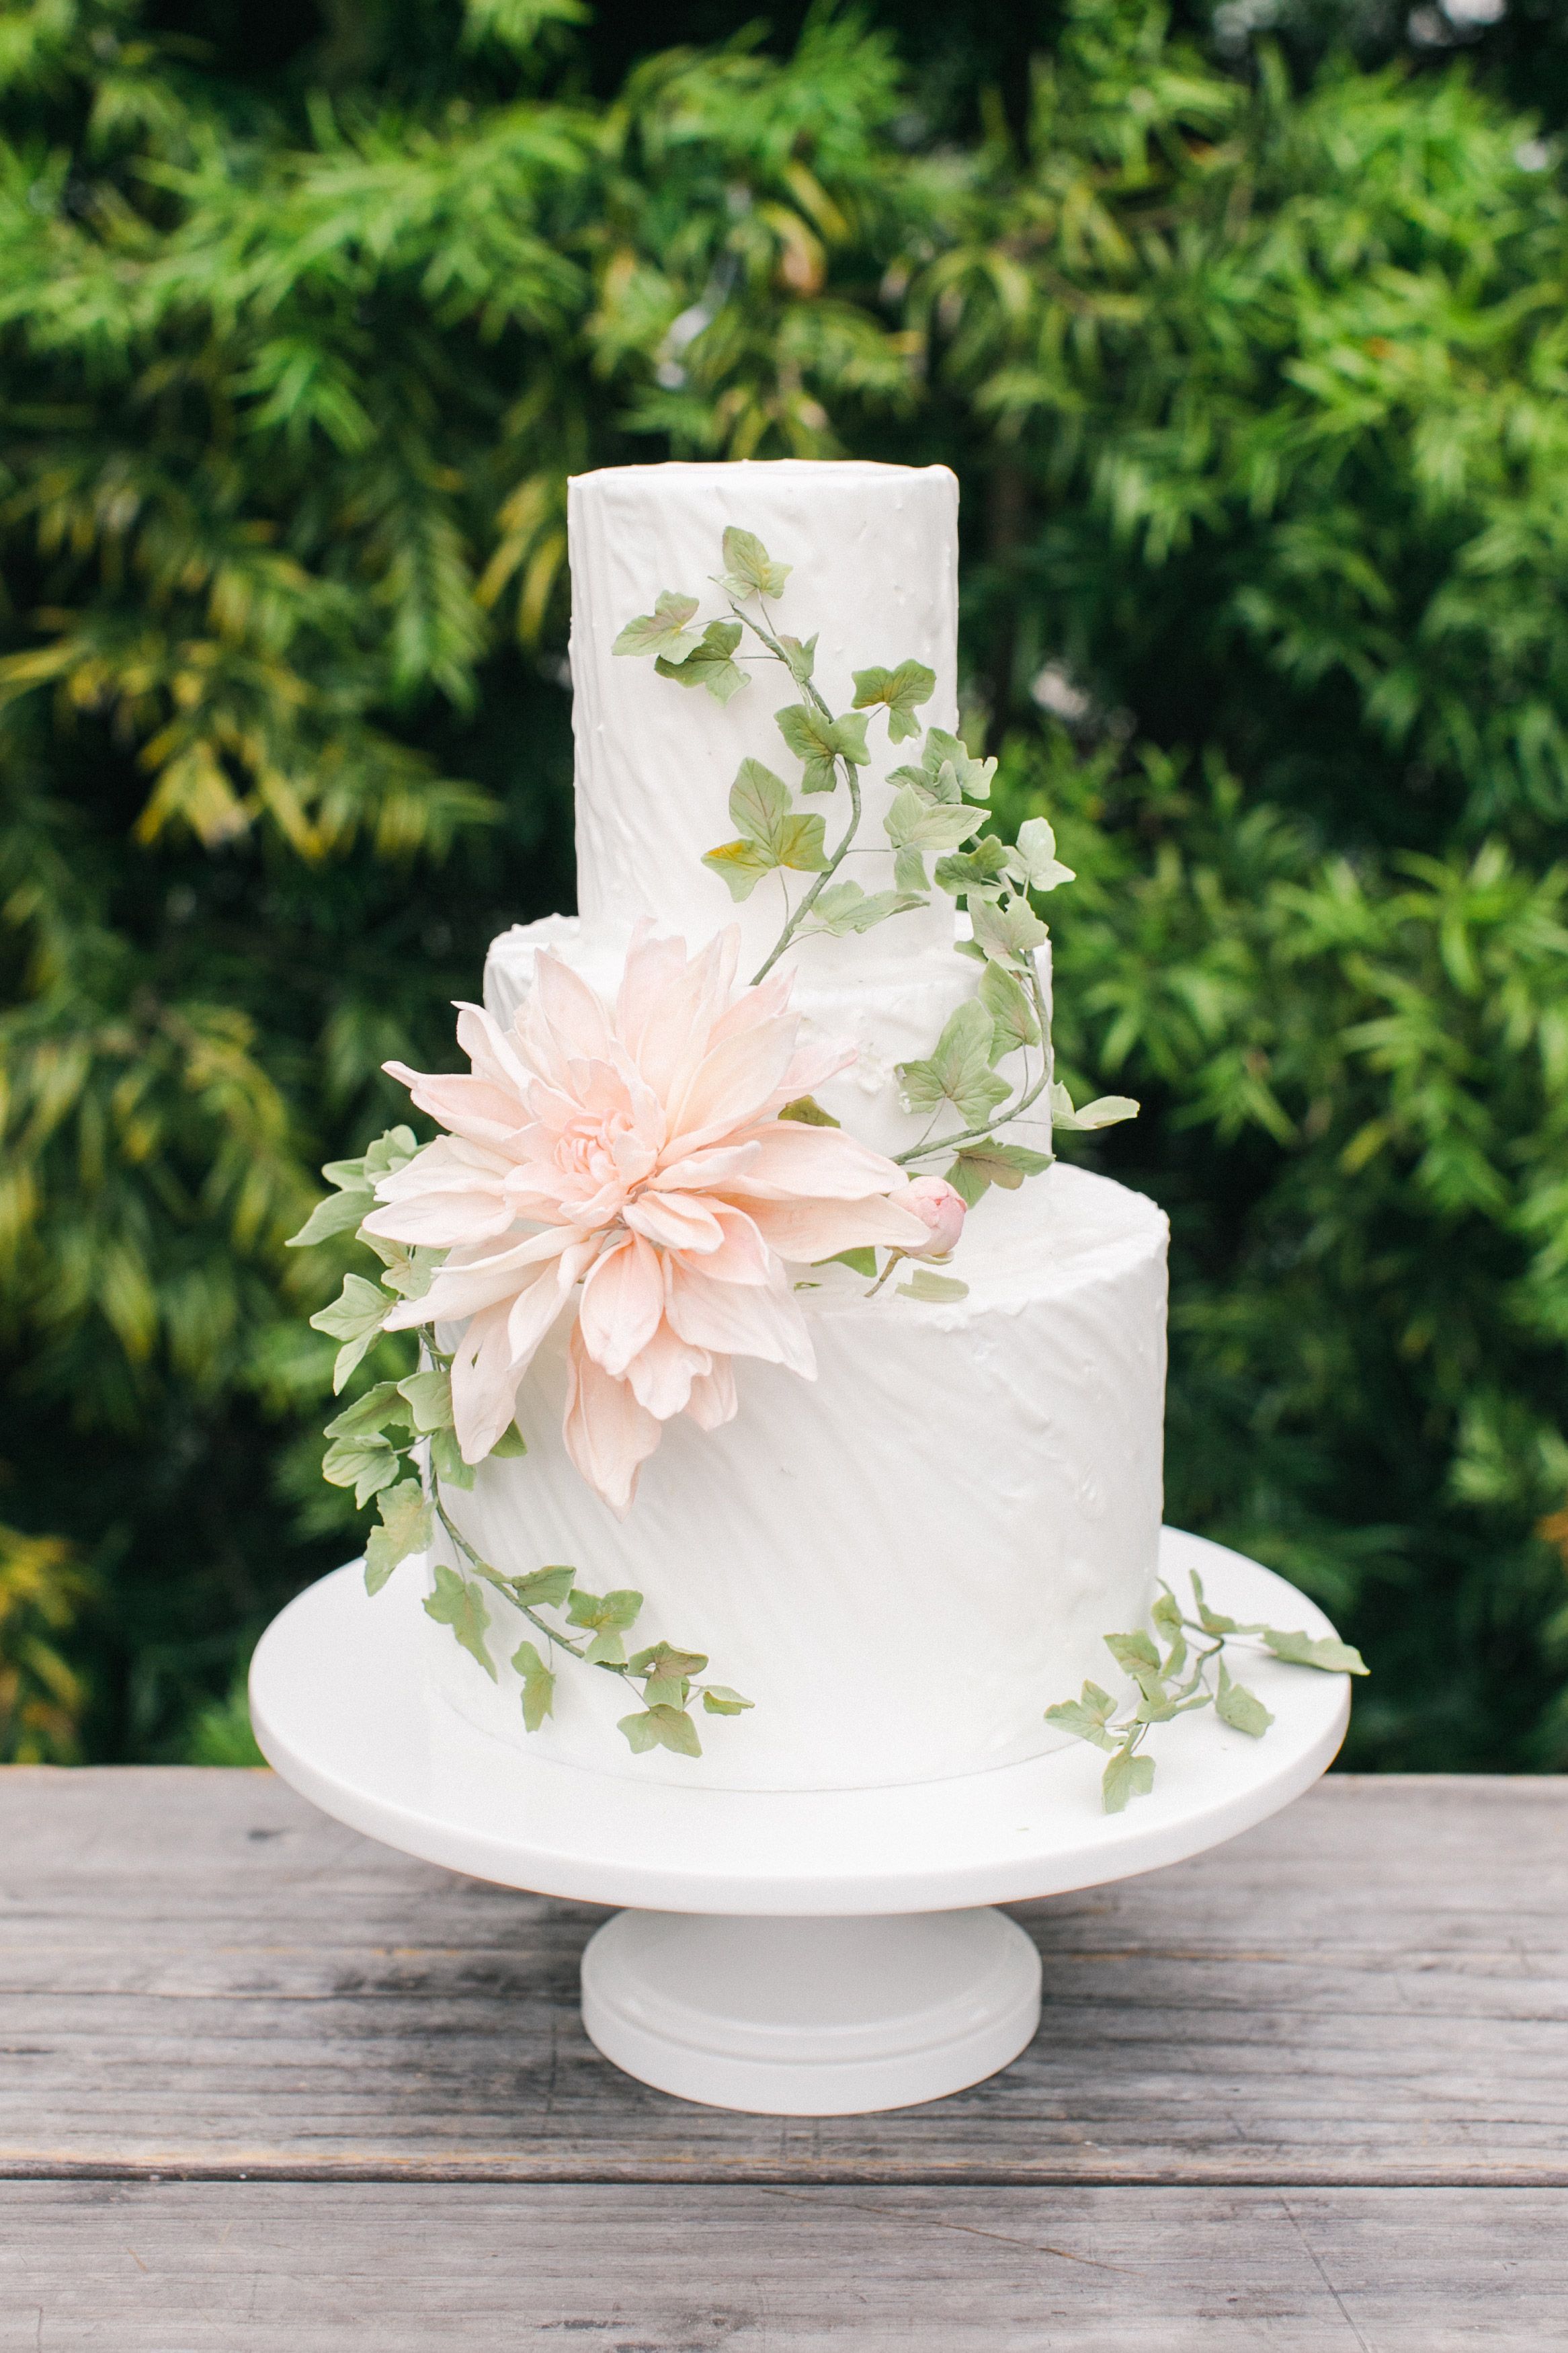 Wedding Cakes with Sugar Flowers That Look Incredibly Real -   21 cake White rustic ideas